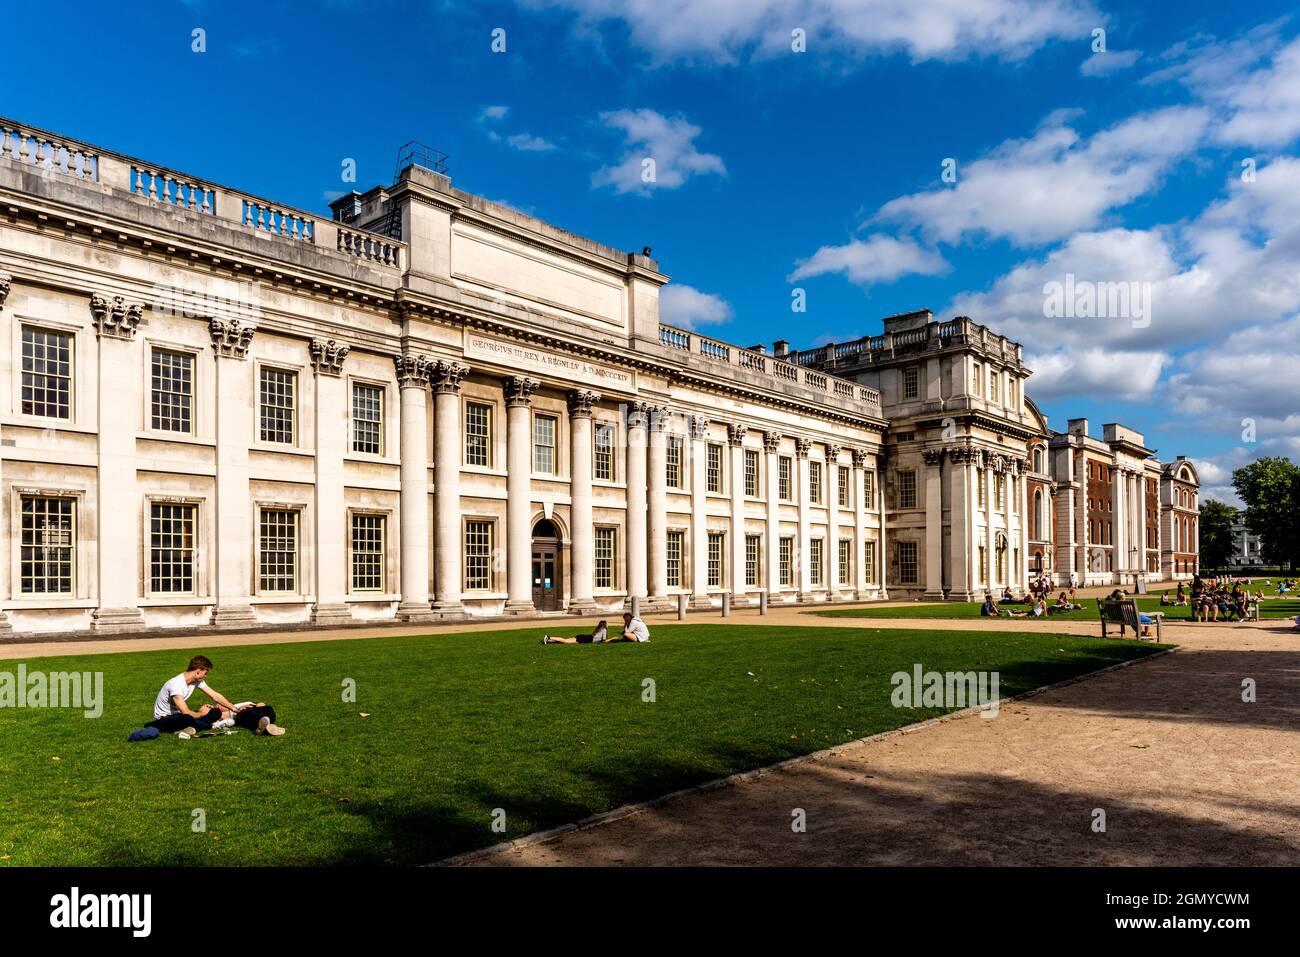 Young People Sitting In The Gardens At The Old Royal Navy College, Greenwich, London, UK. Stock Photo